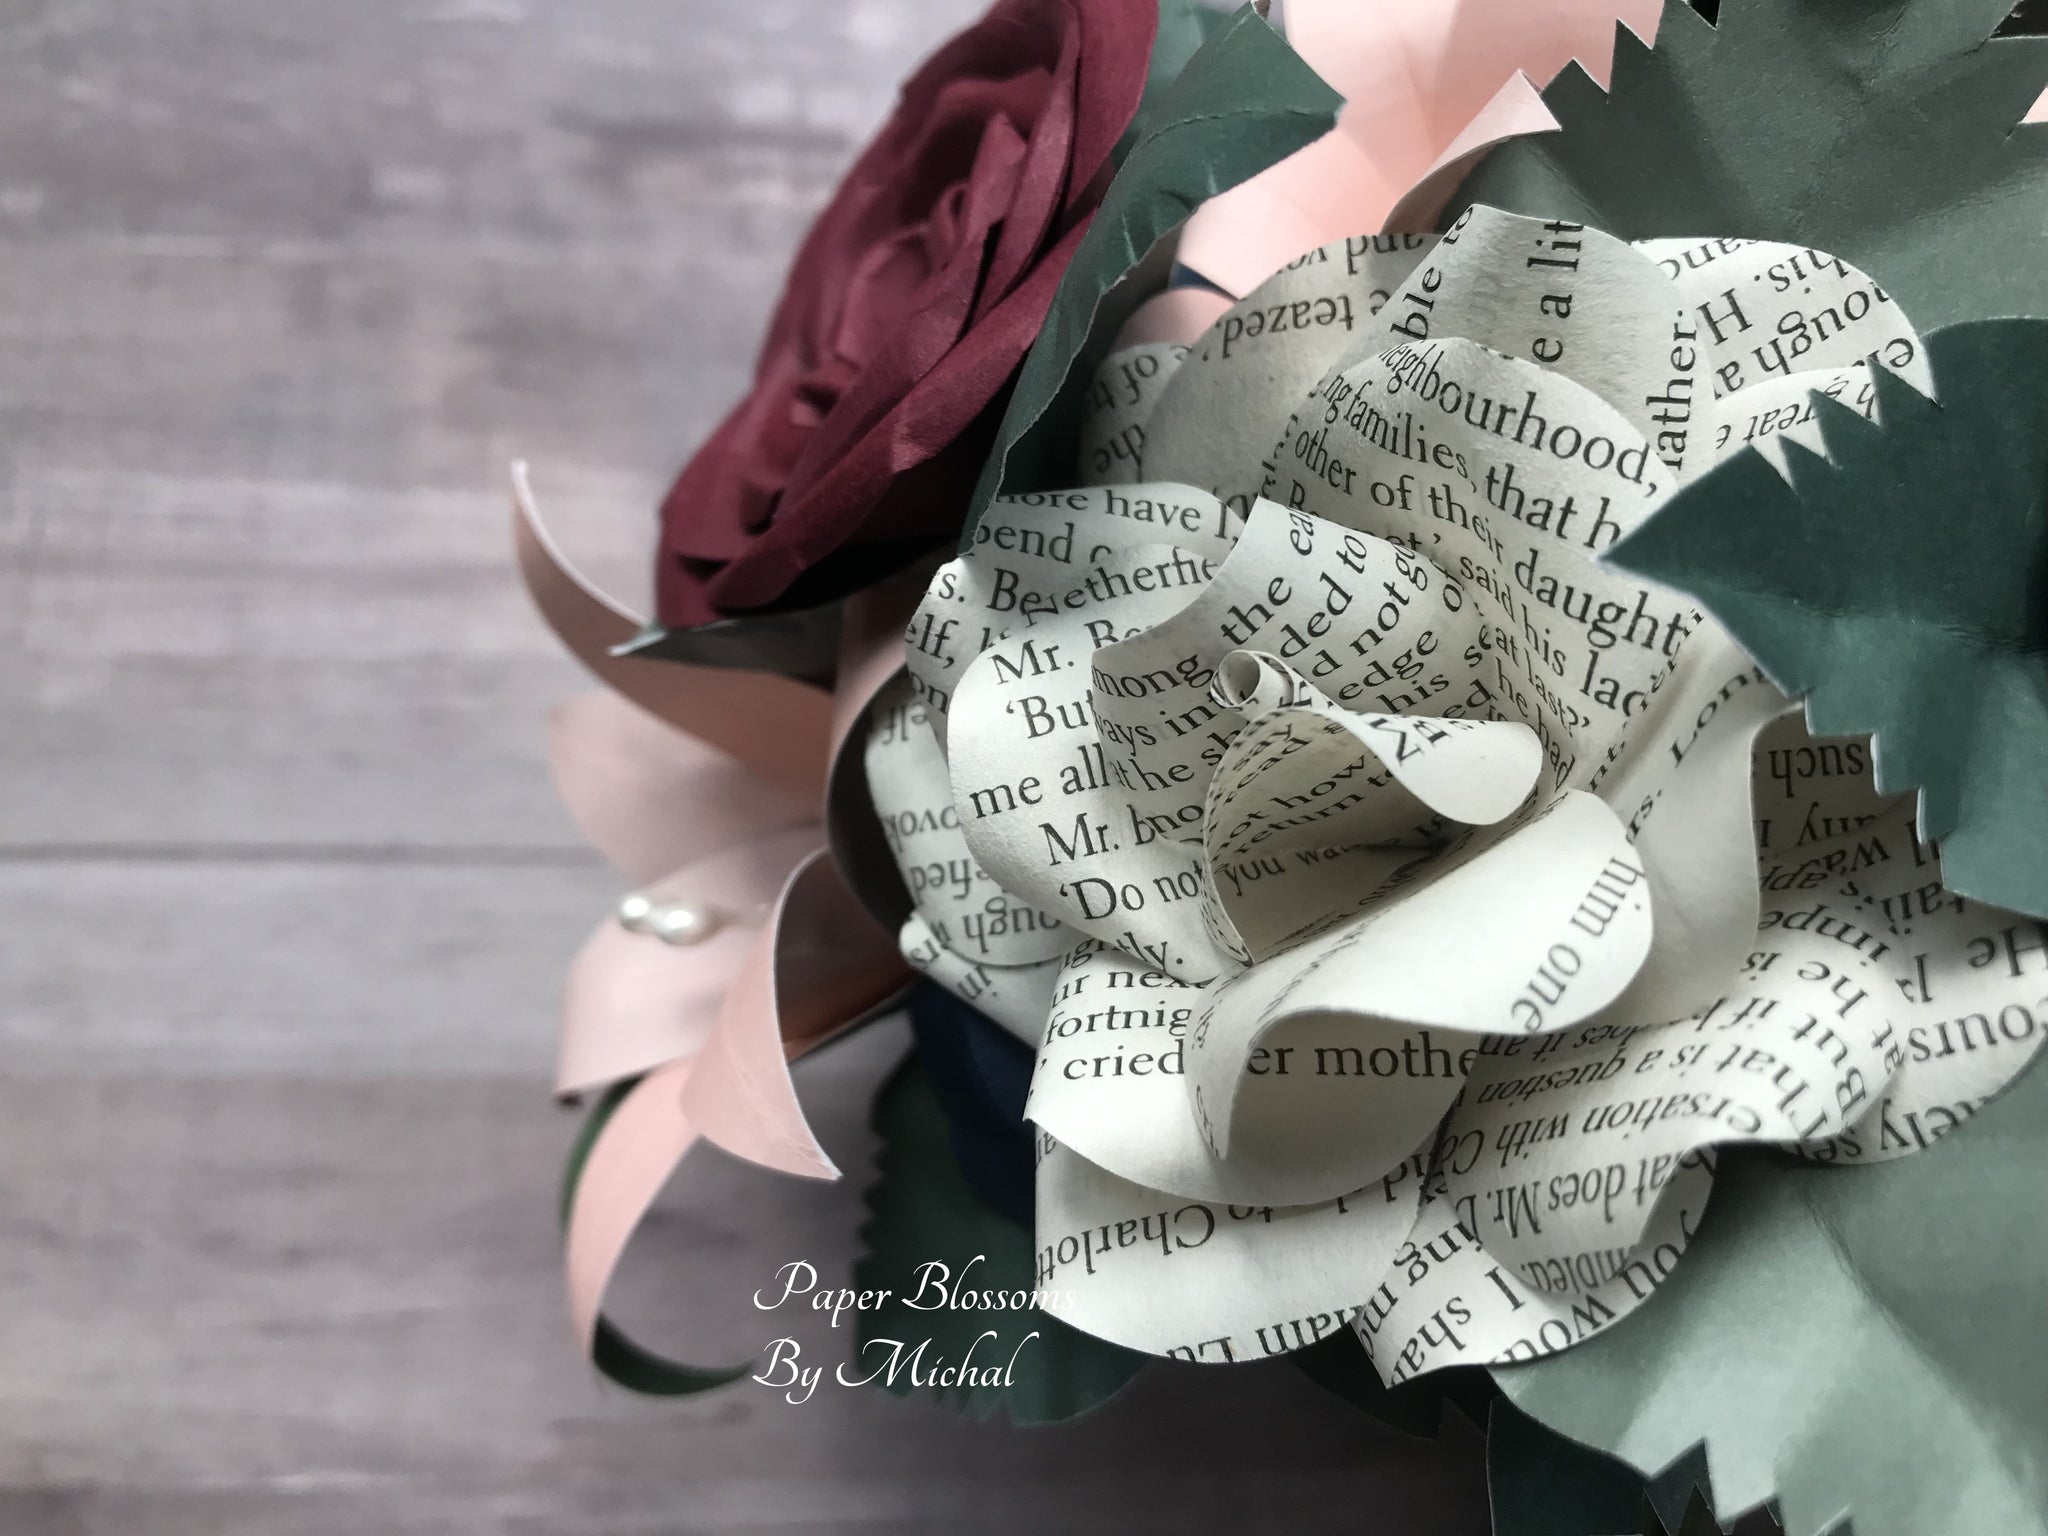 LUX Pride and Prejudice Paper Flower Wedding Bouquet – Paper Blossoms By  Michal, LLC